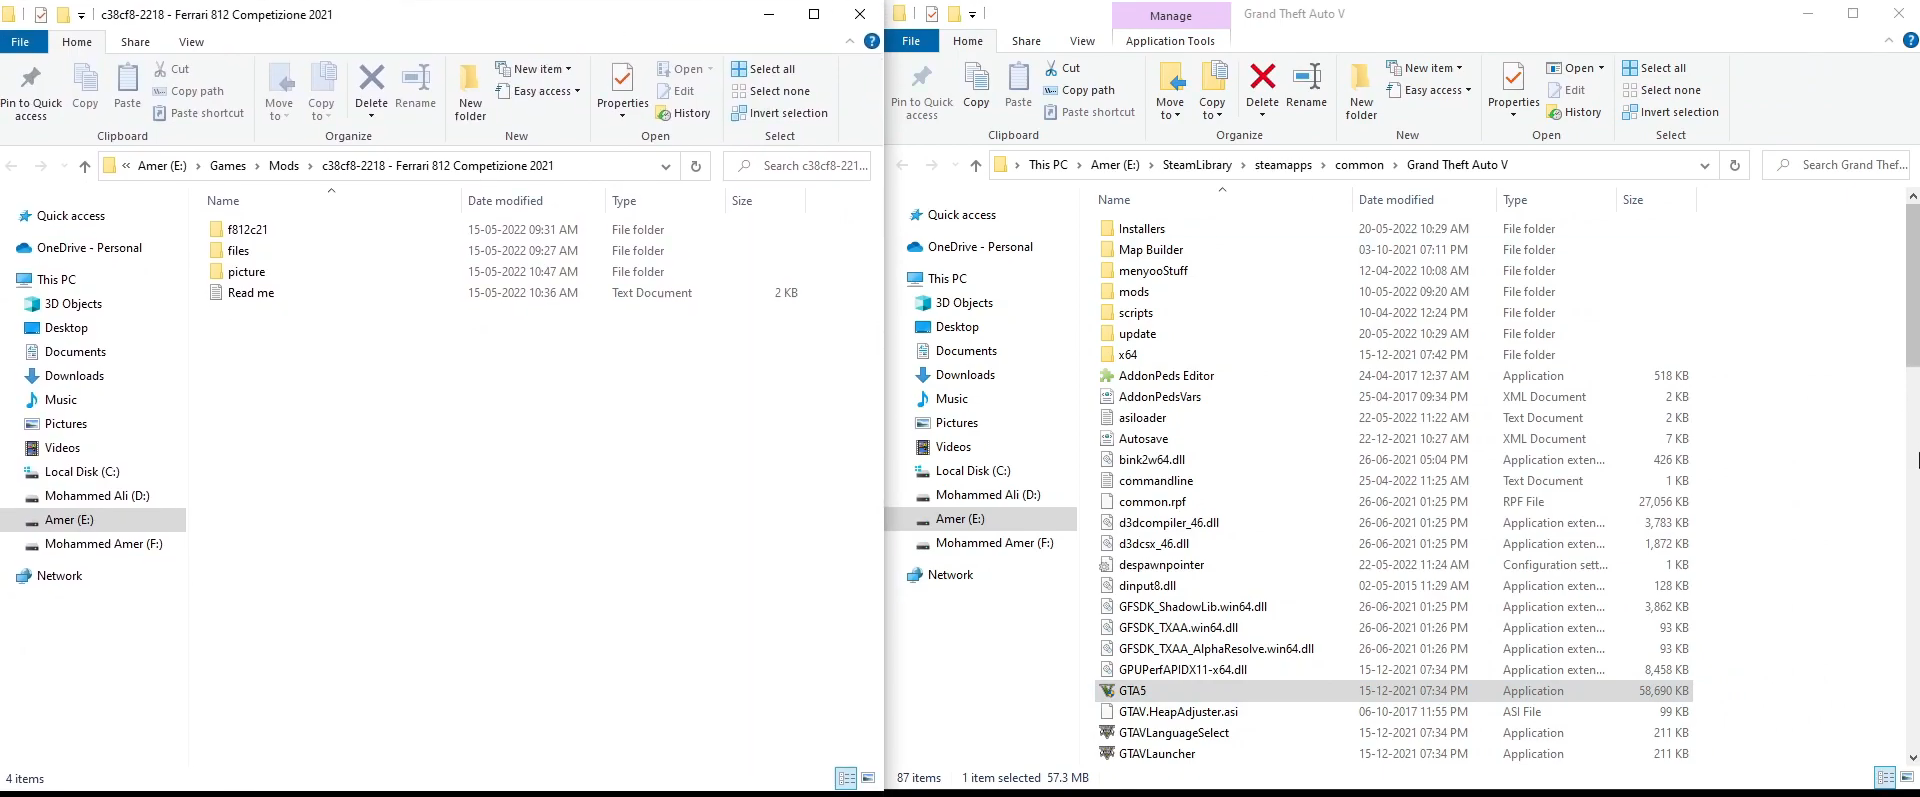 Enter into extracted folder and open the gta5 main directory on the other side.